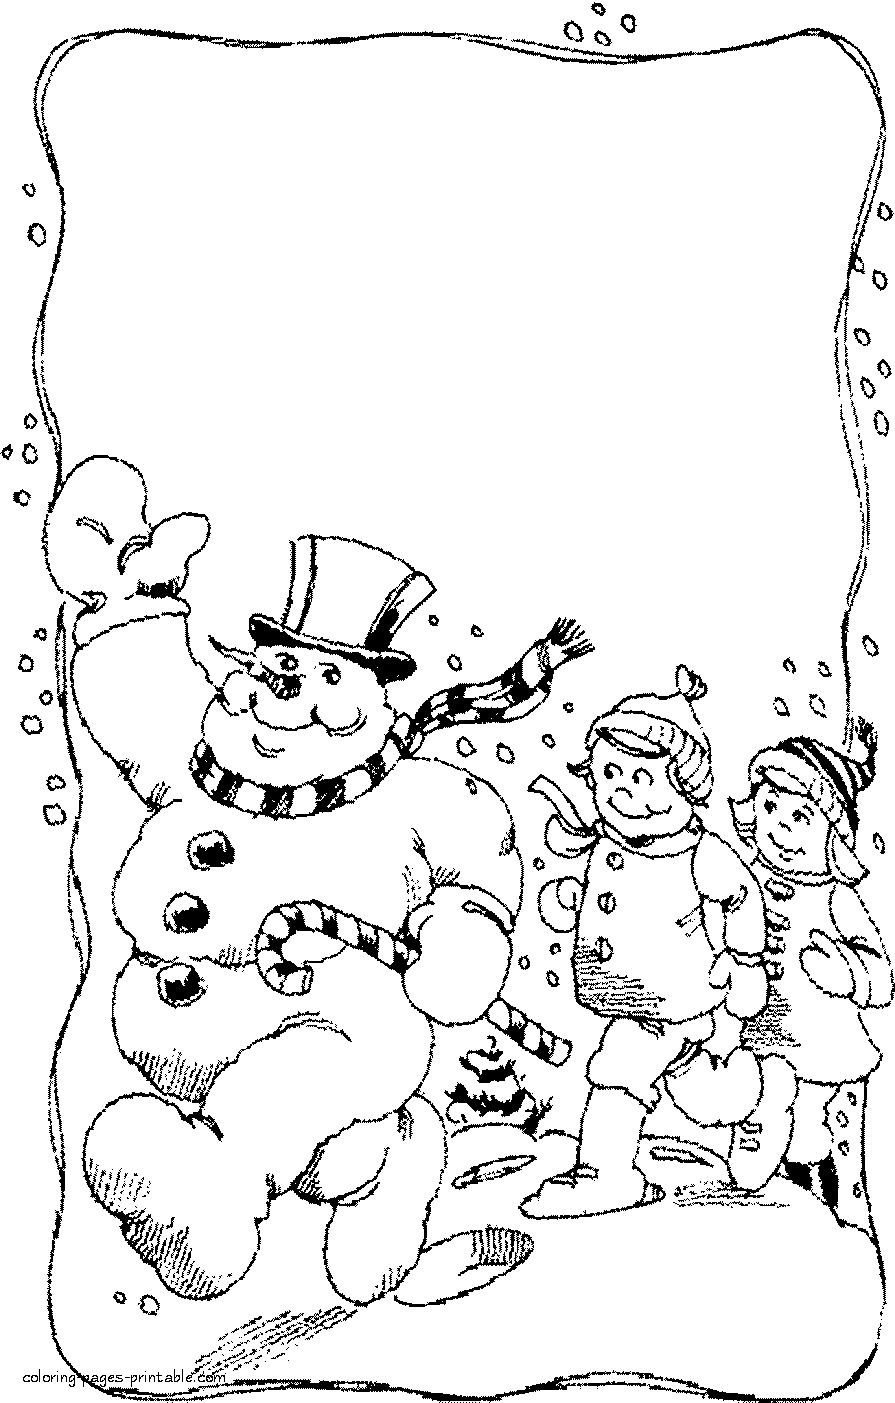 Christmas greeting card with the snowman for self coloring